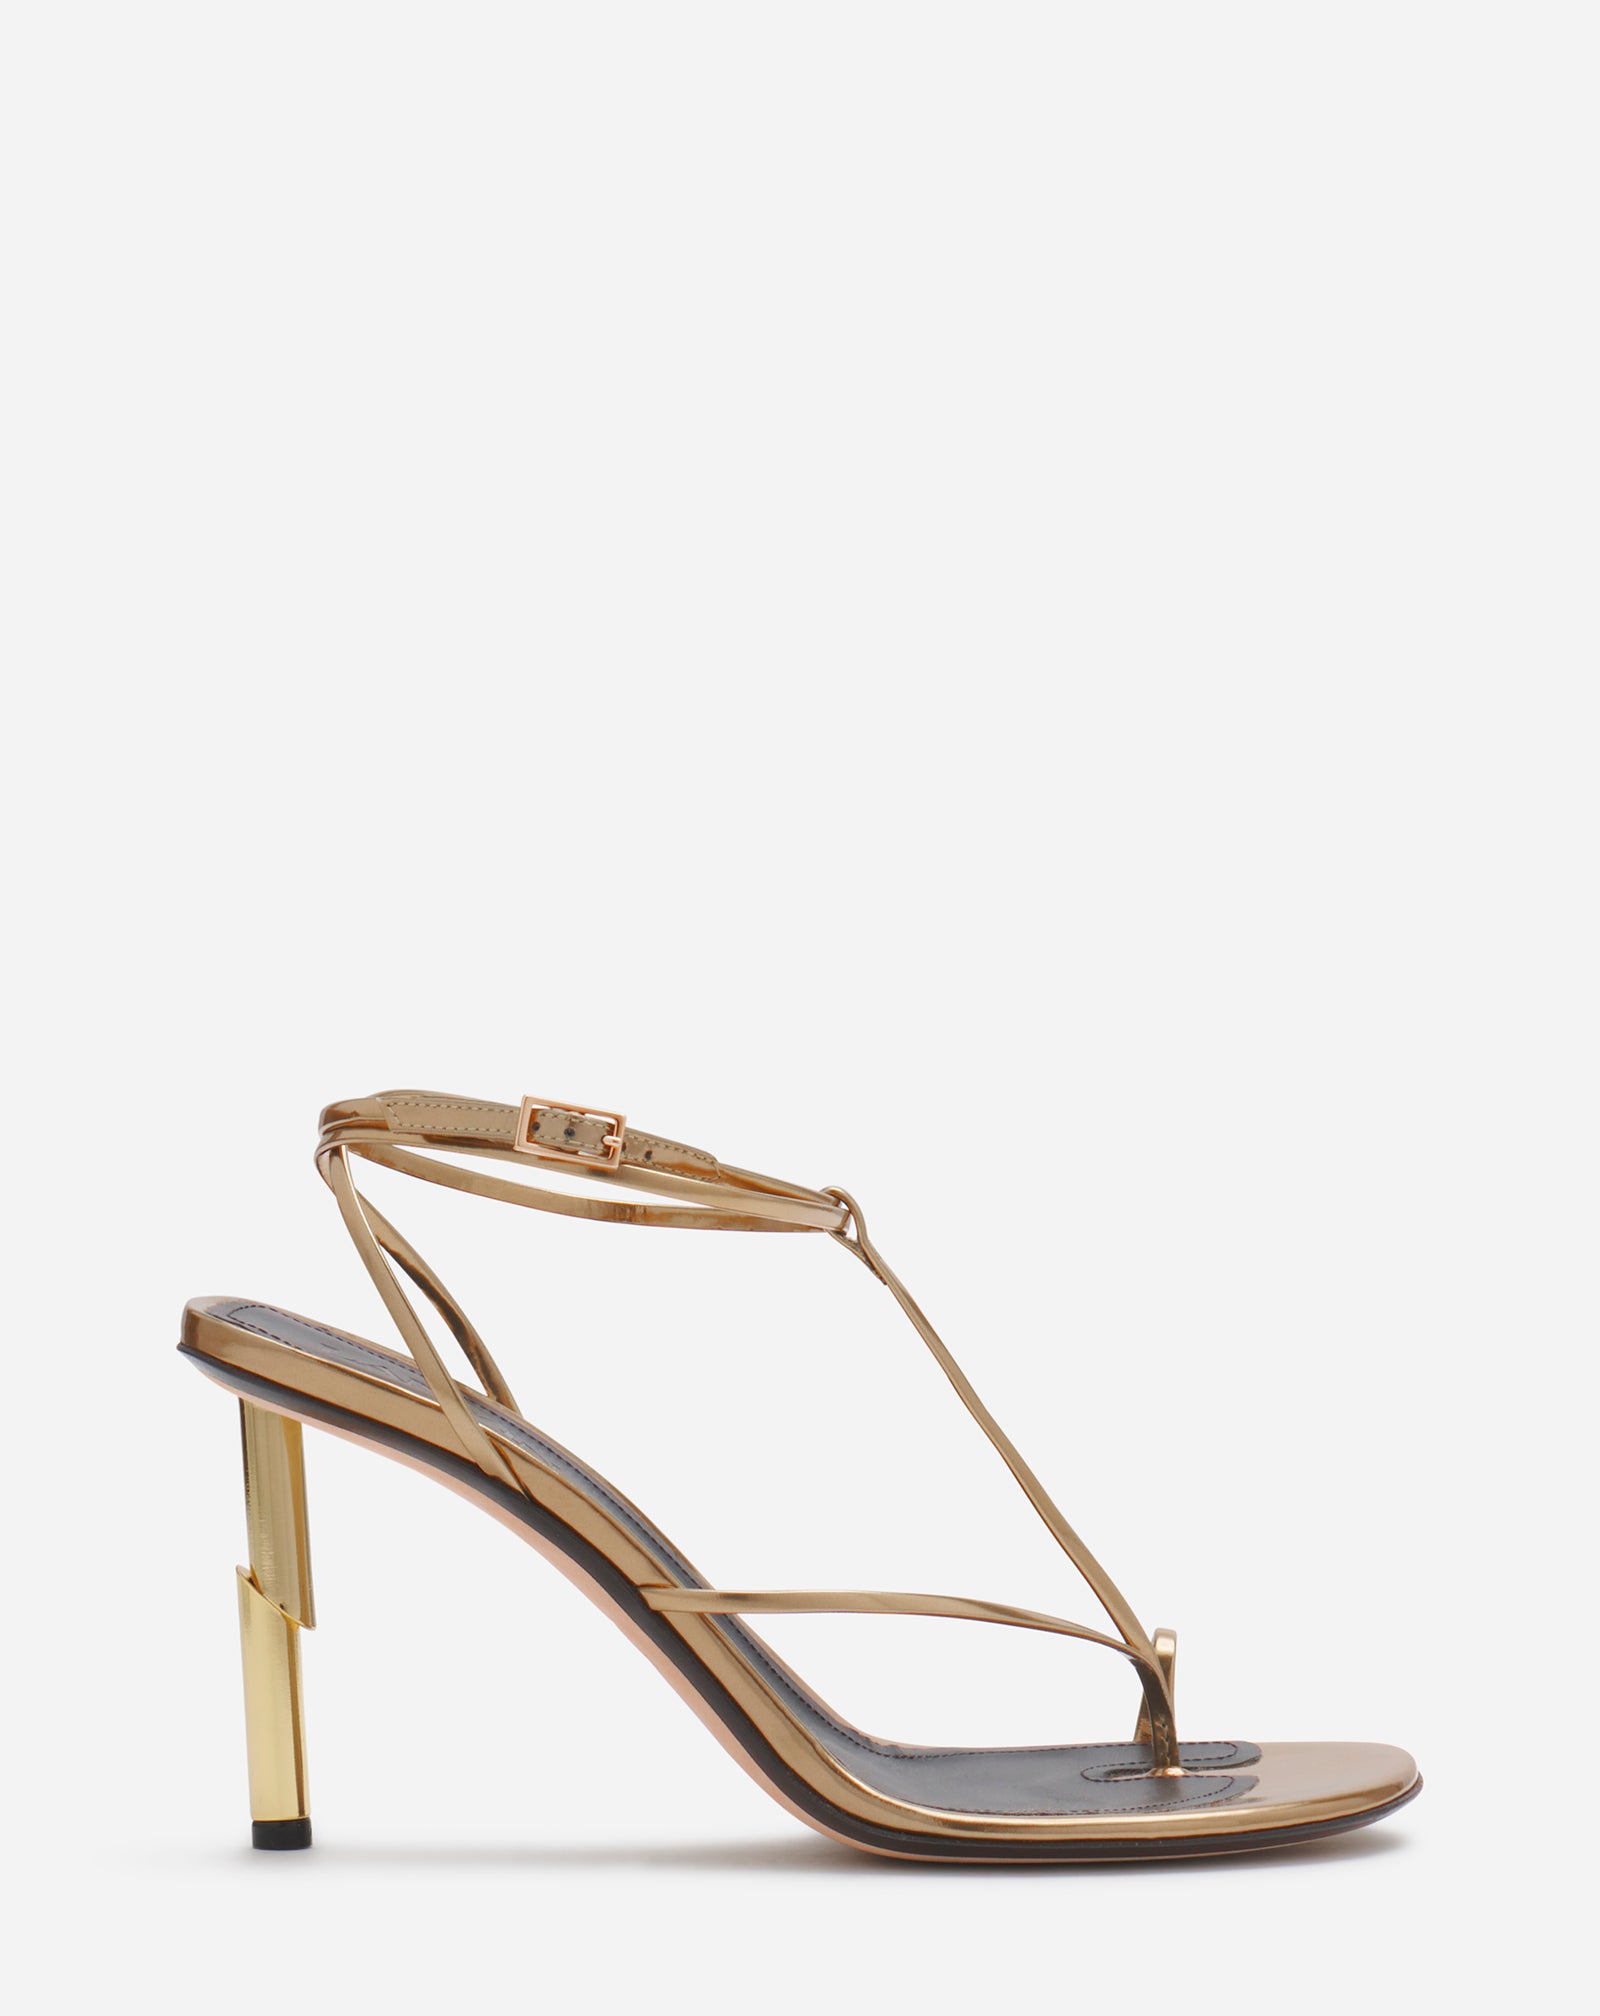 SEQUENCE BY LANVIN SANDALS IN METALLIC LEATHER